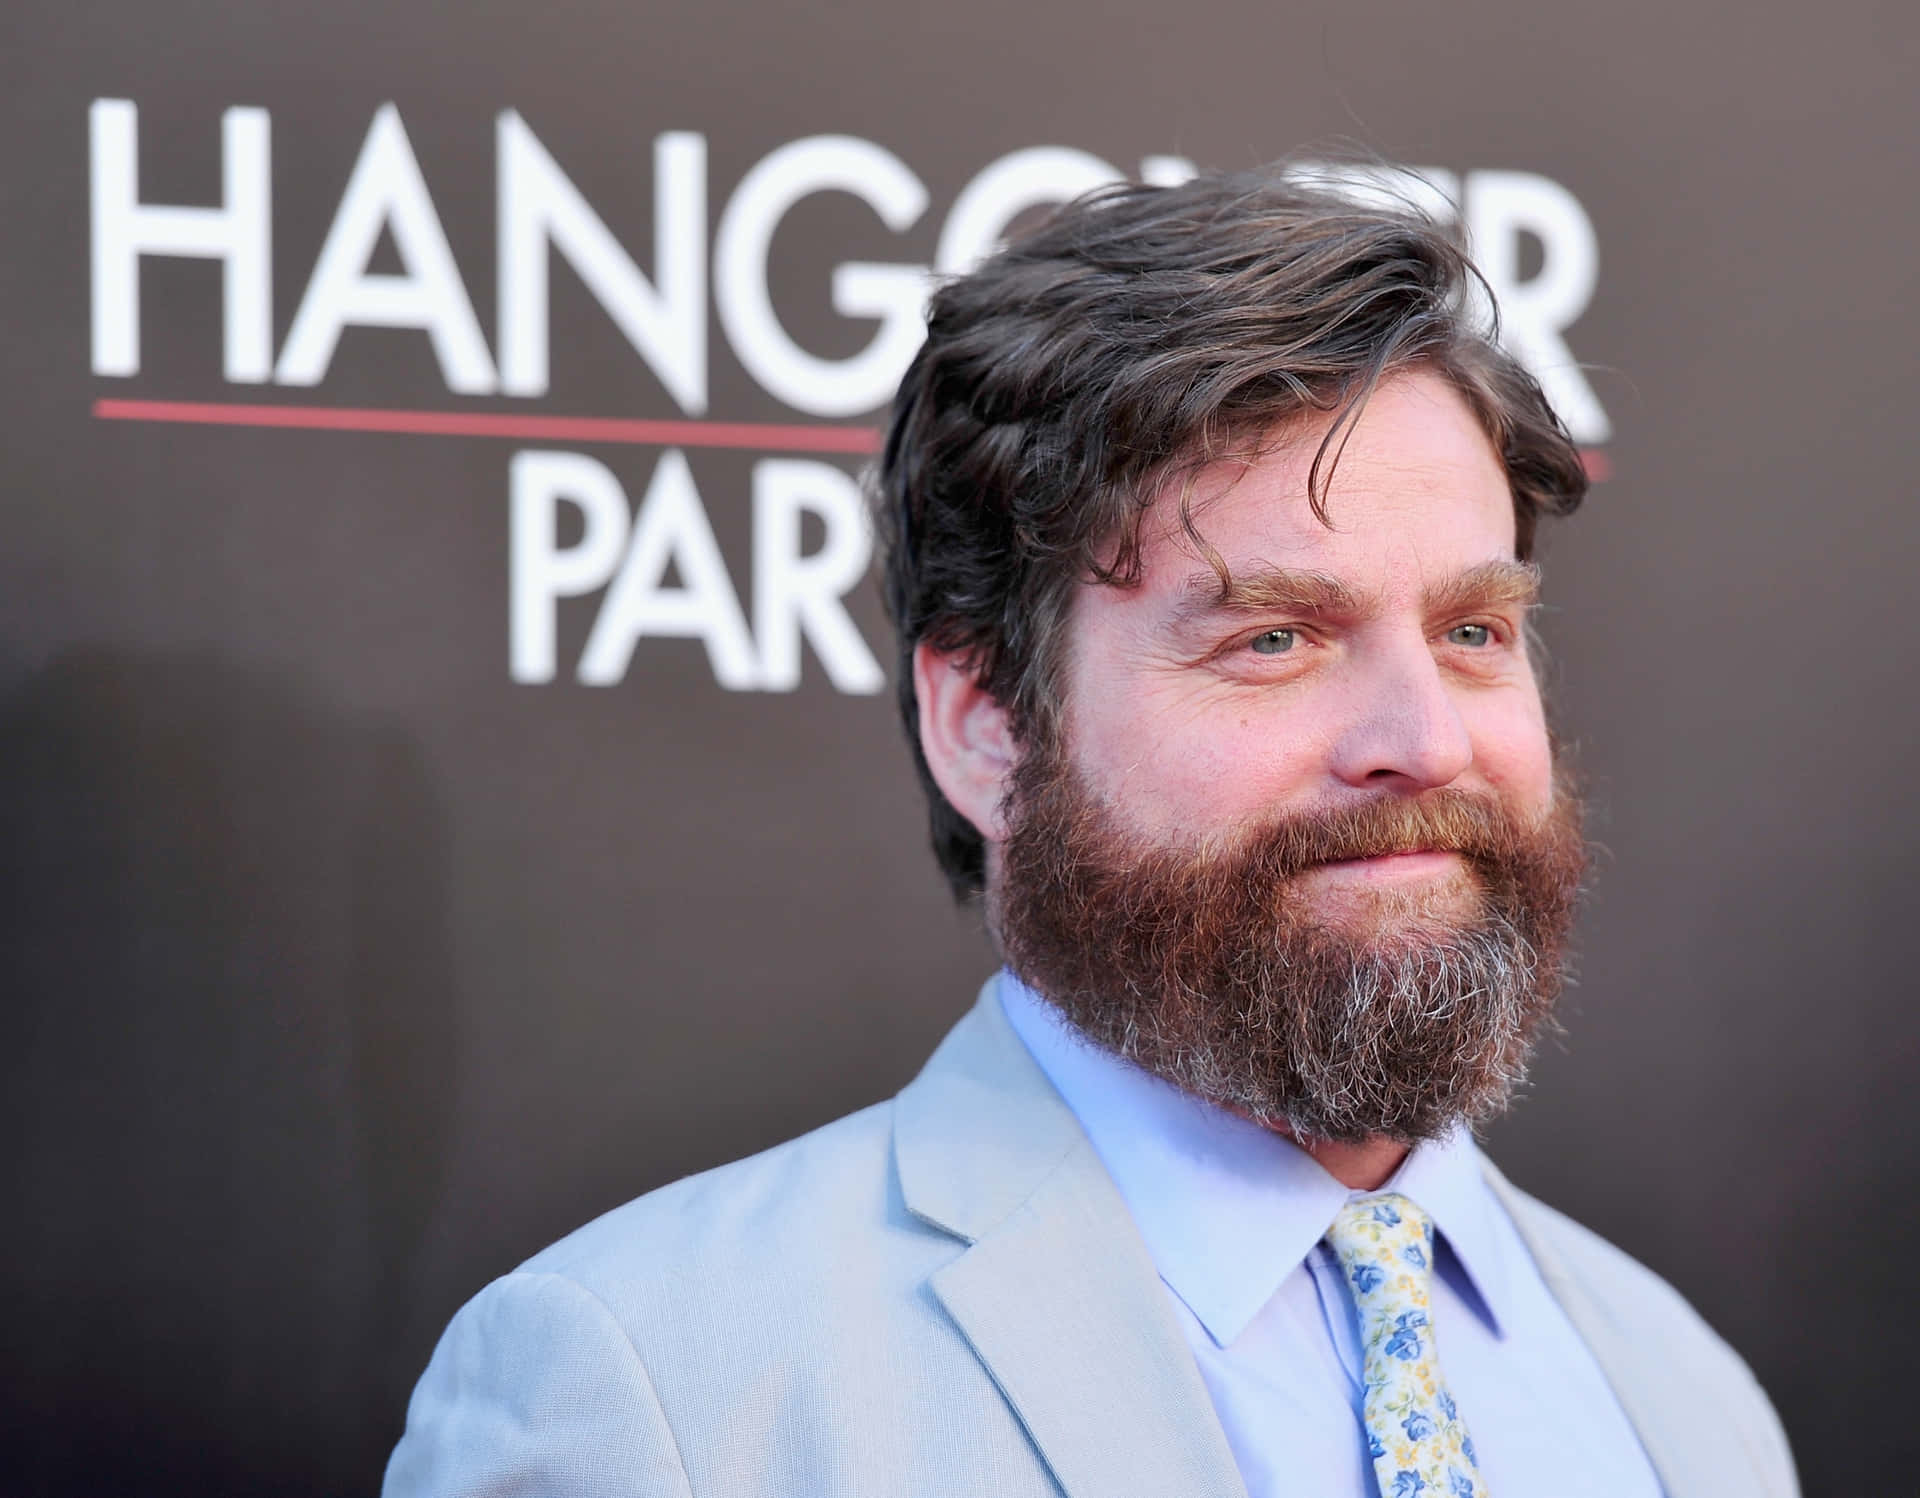 Actor Zach Galifianakis at the premiere of The Hangover Part II in 2011 Wallpaper